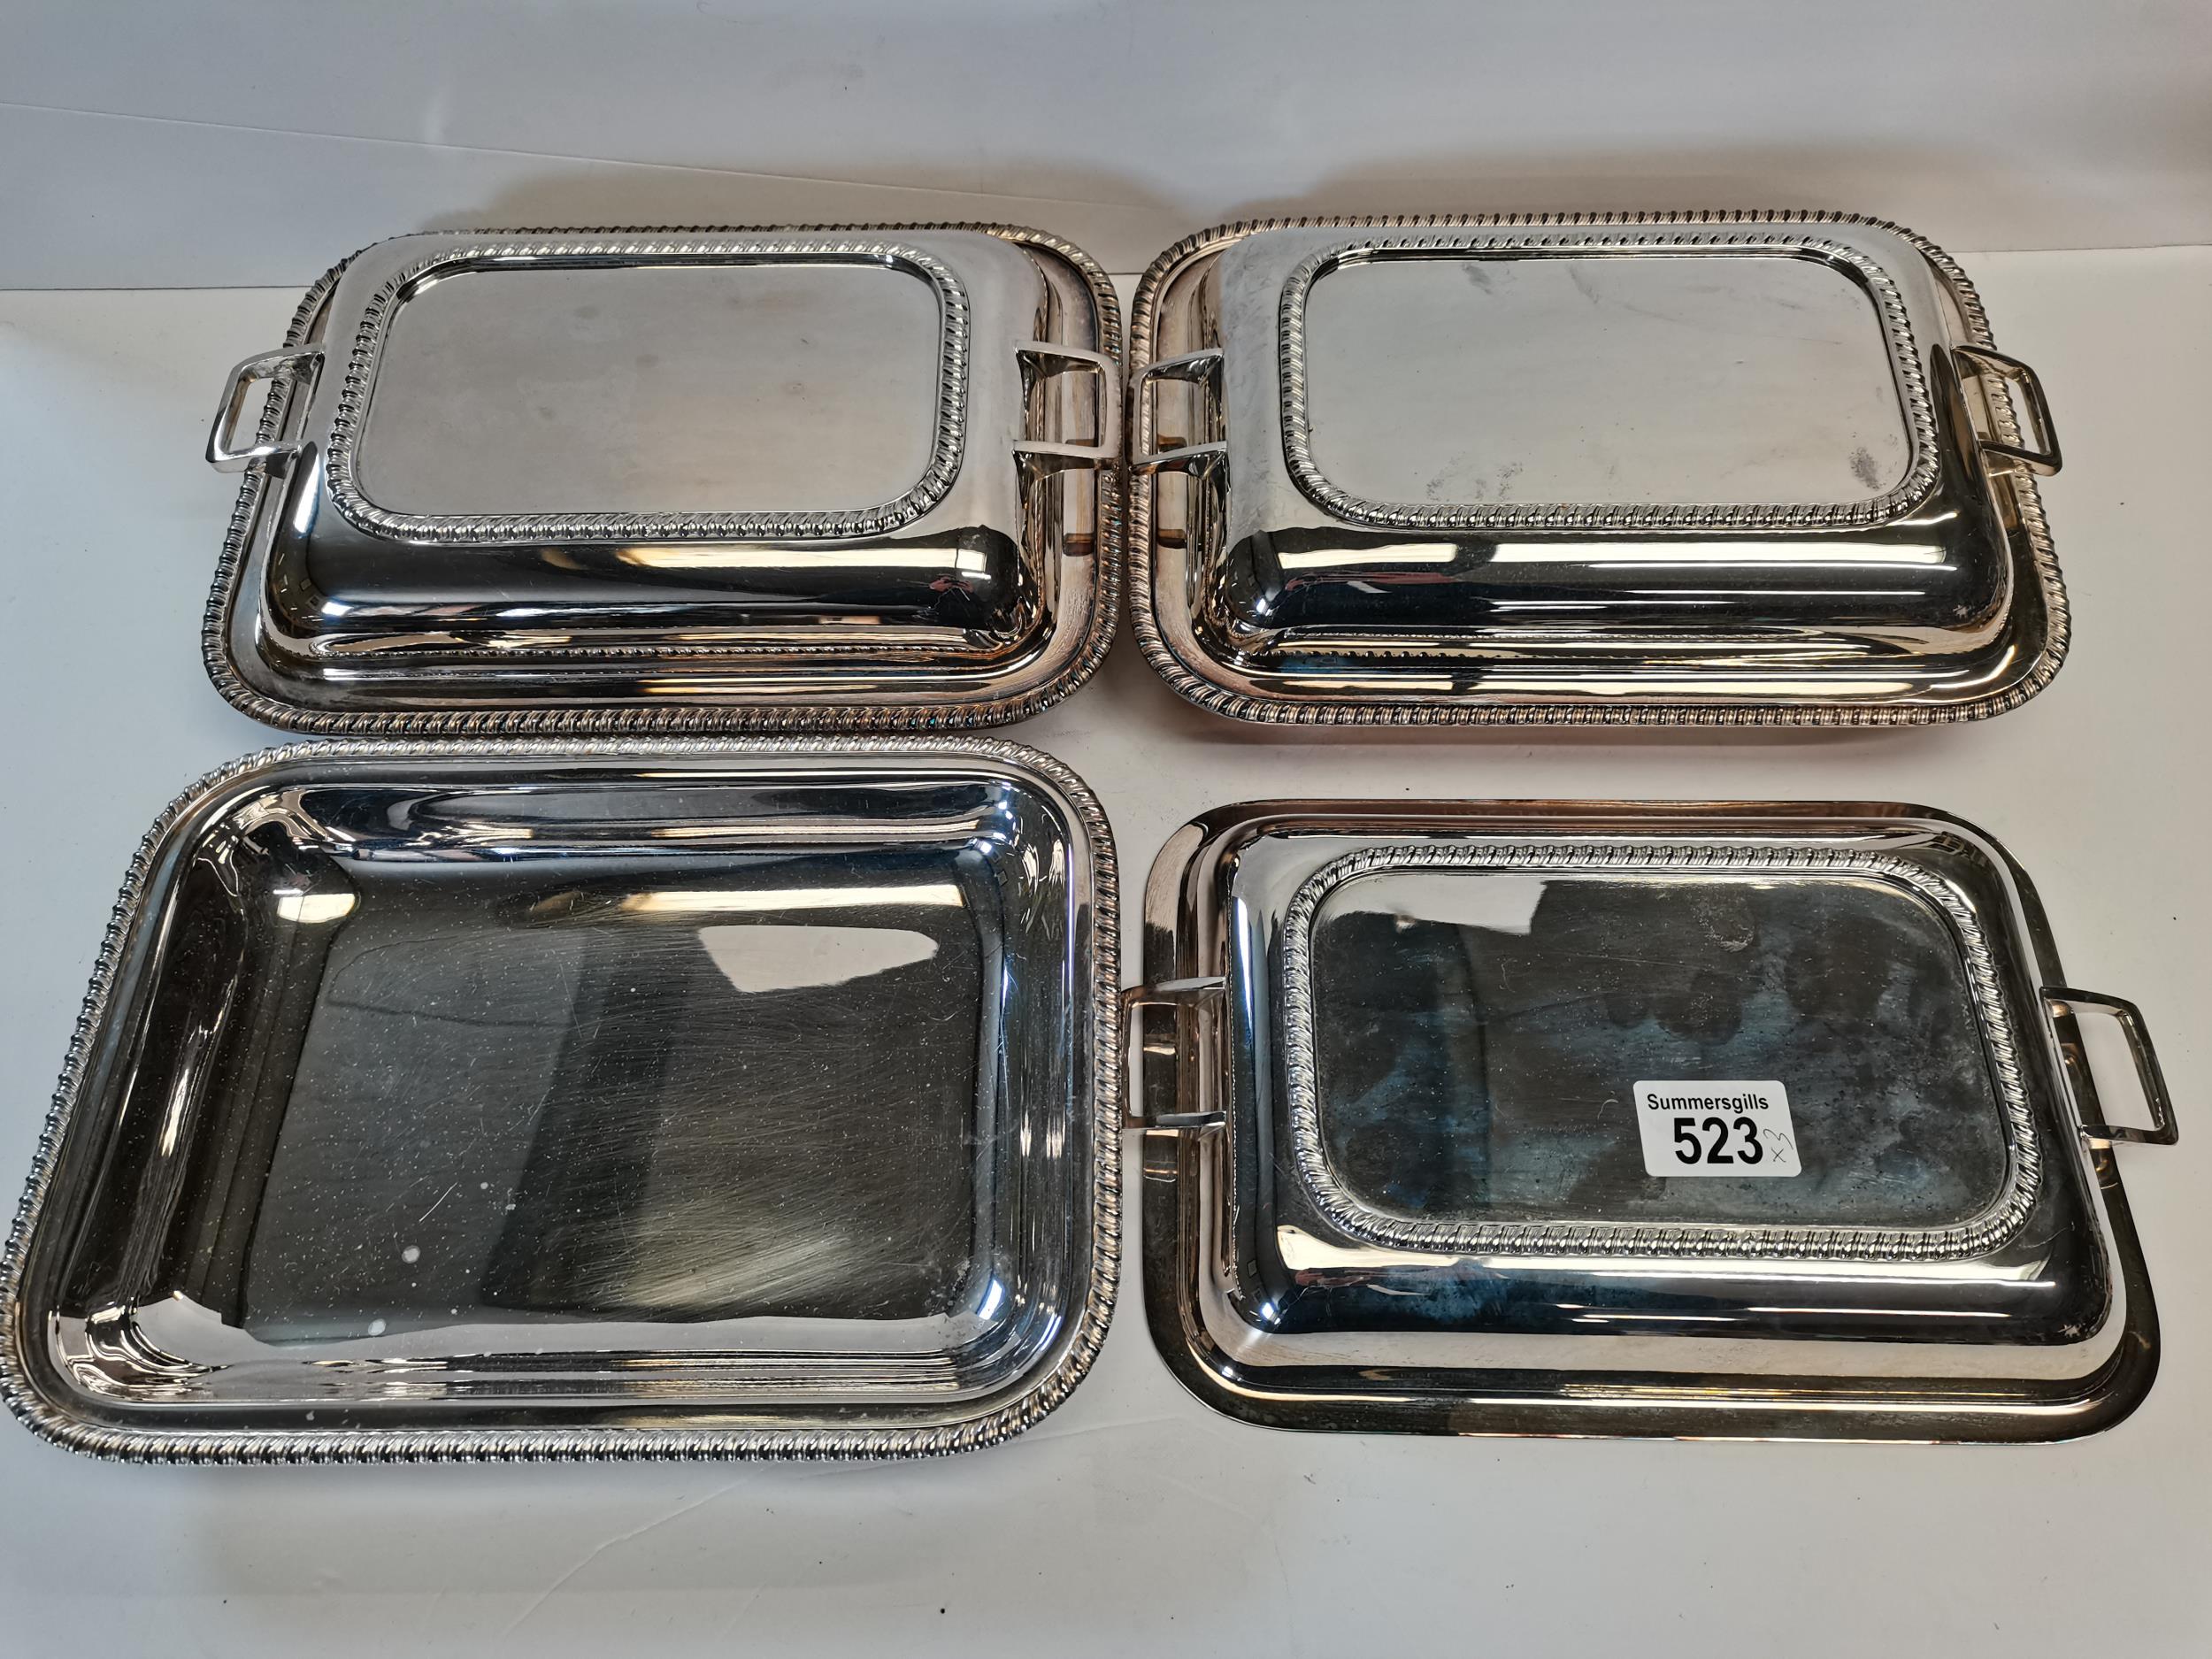 X3 plated Entrée dishes